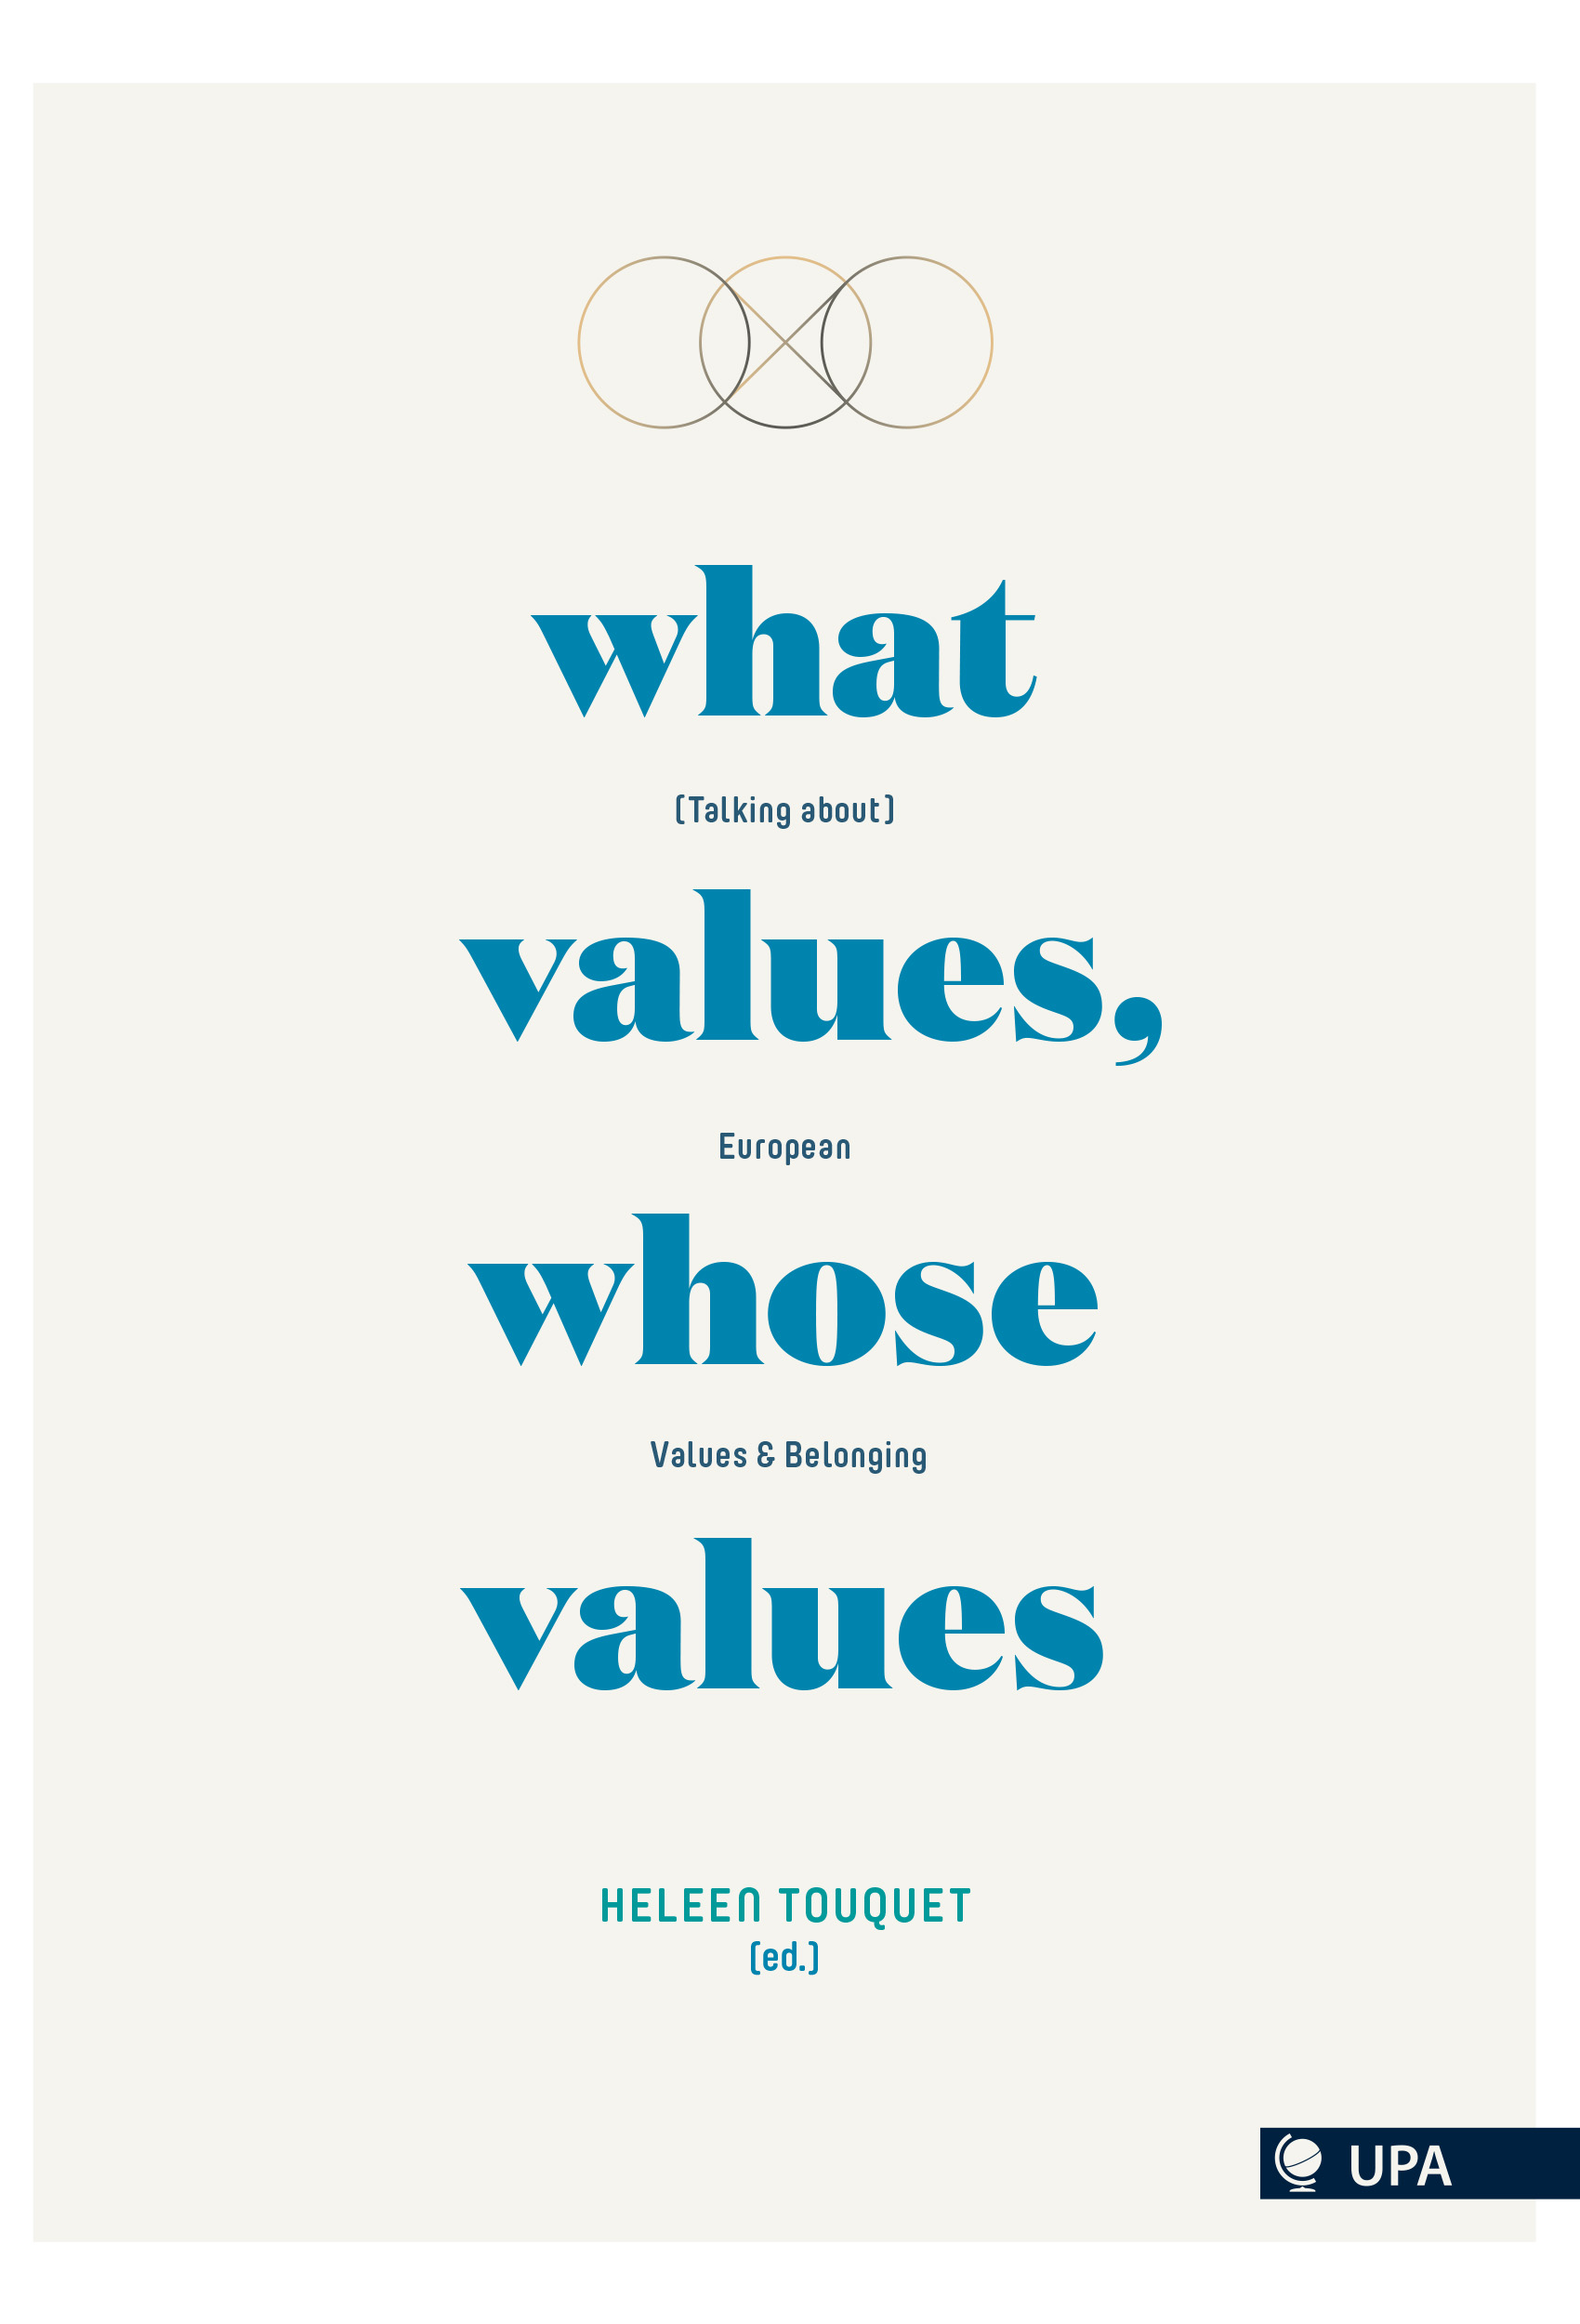 WHAT VALUES, WHOSE VALUES